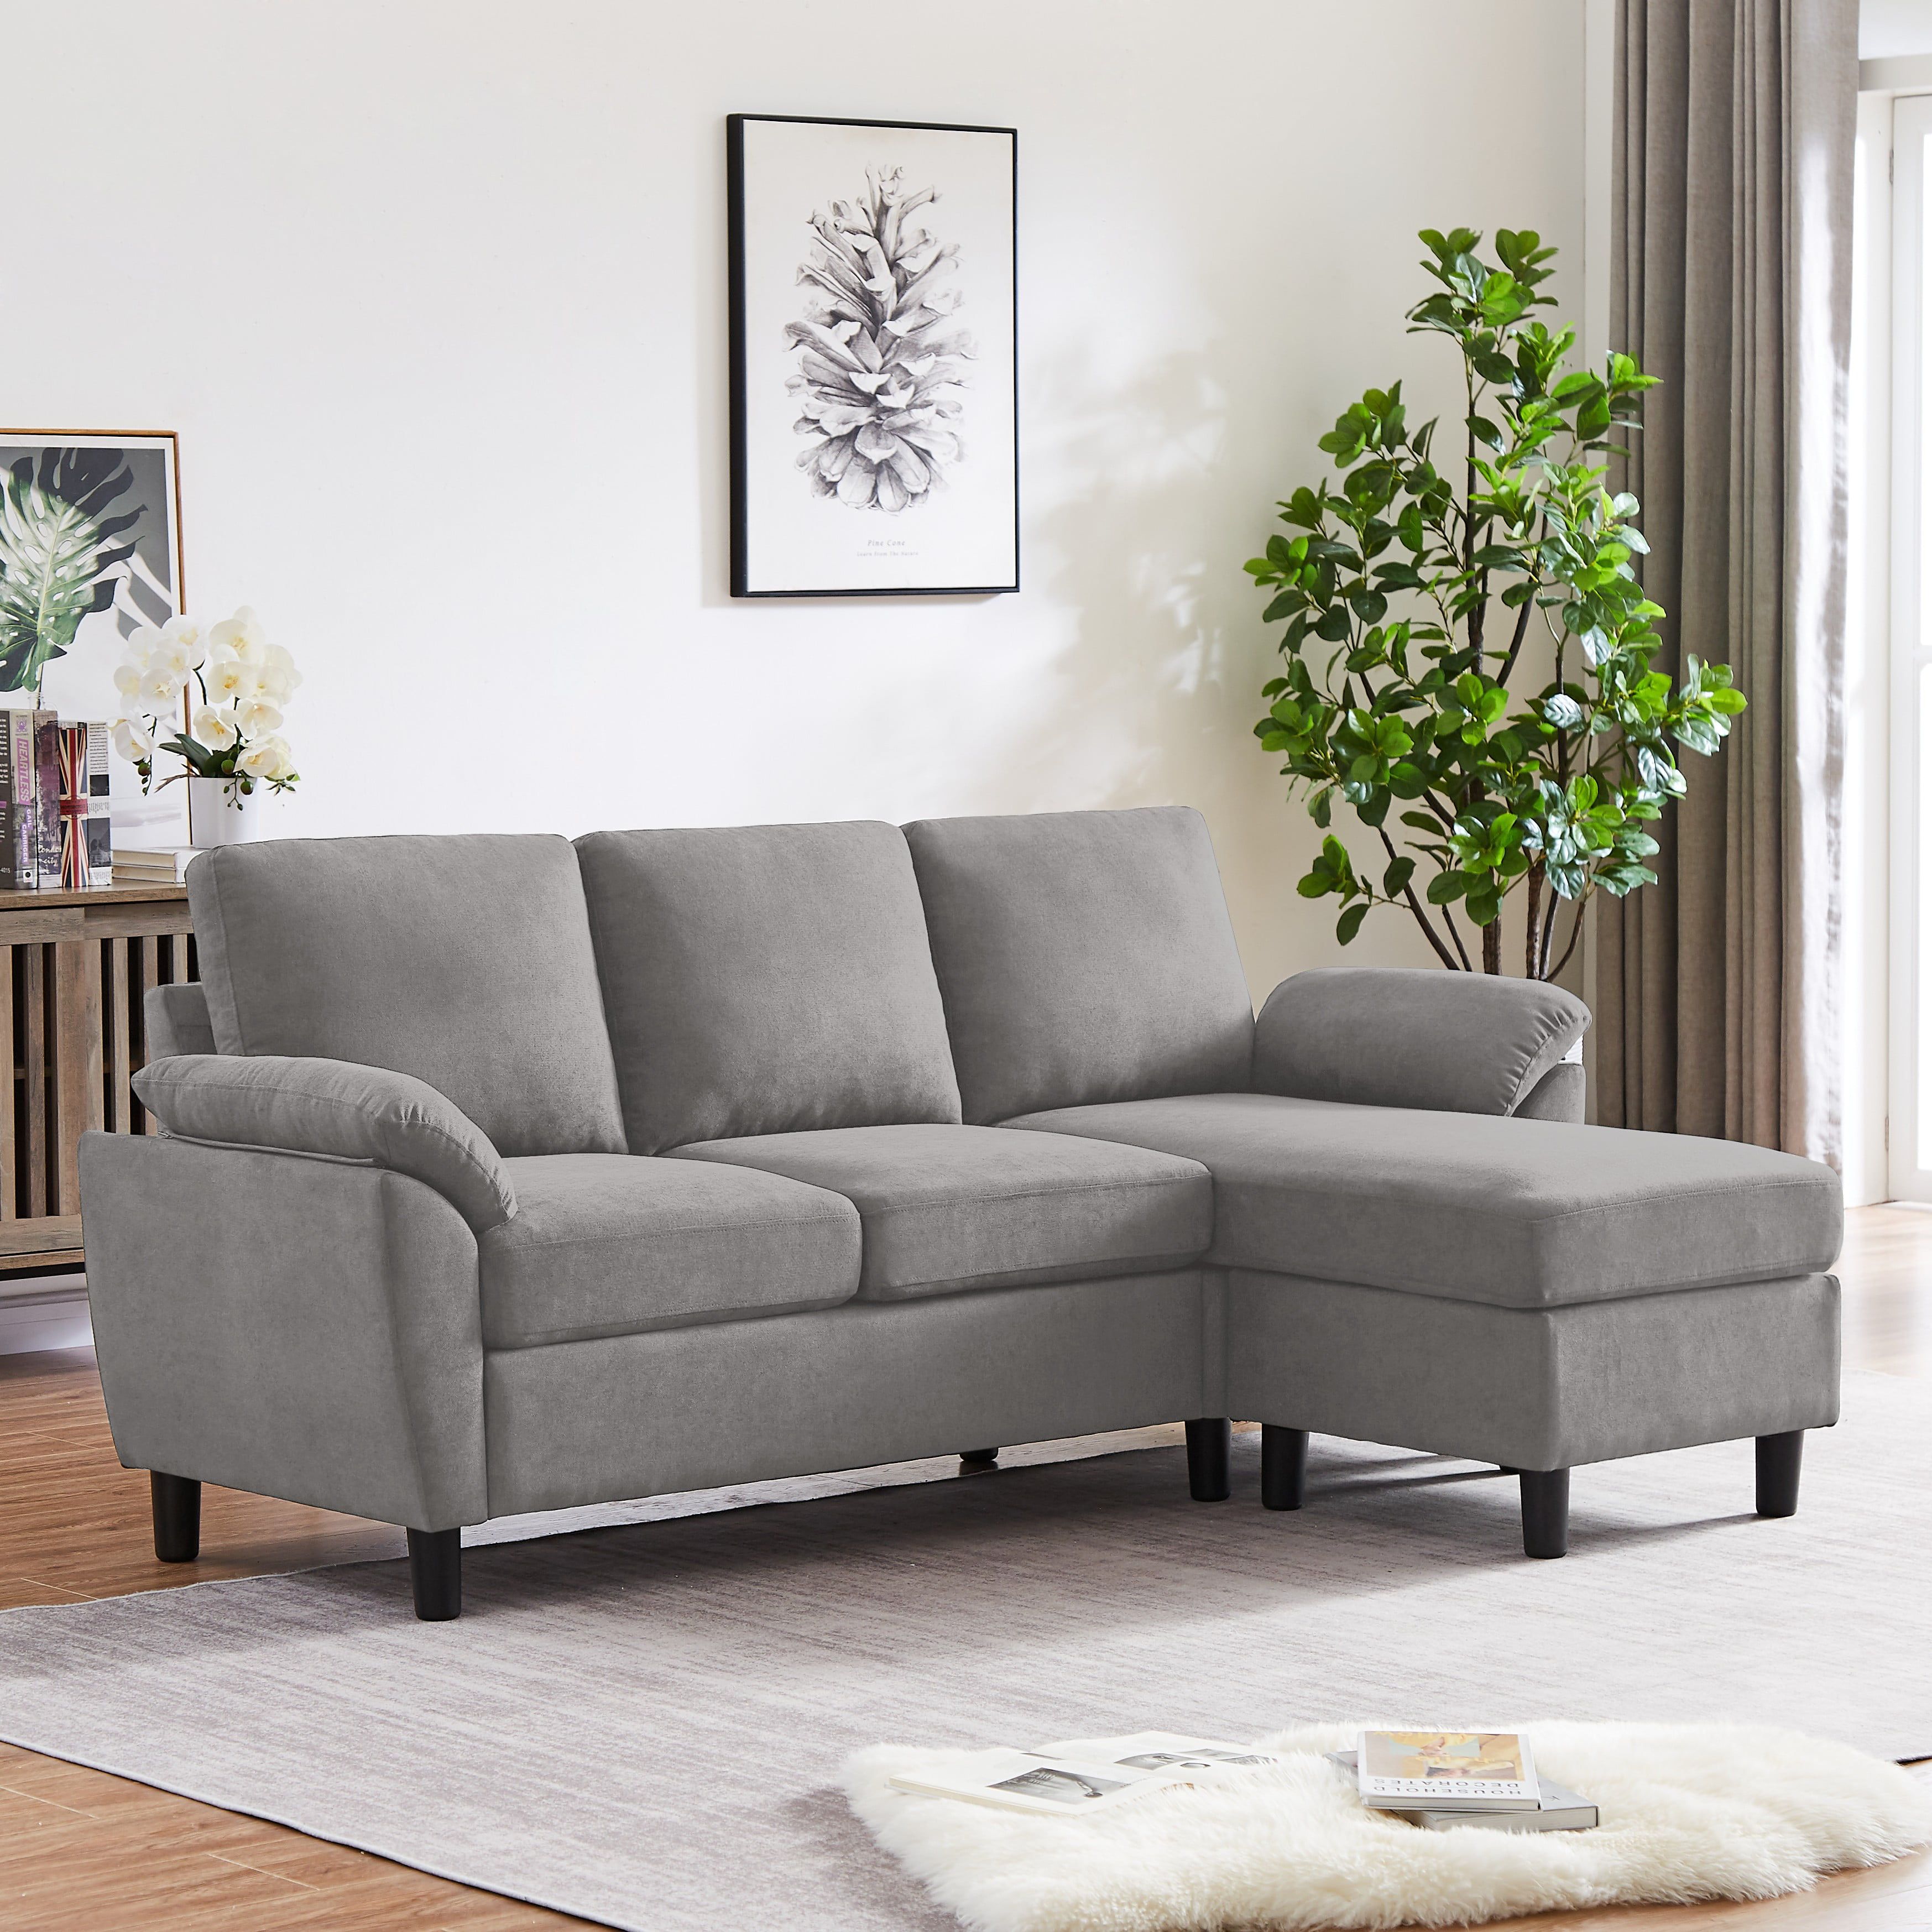 Jarenie Modern Fabric L Shapped Sofa Sectional Couches For Living Room Convertible  Sofa With Matching Chaise For Office, Apartment, Studio – Walmart With Convertible Sofa With Matching Chaise (Gallery 3 of 20)